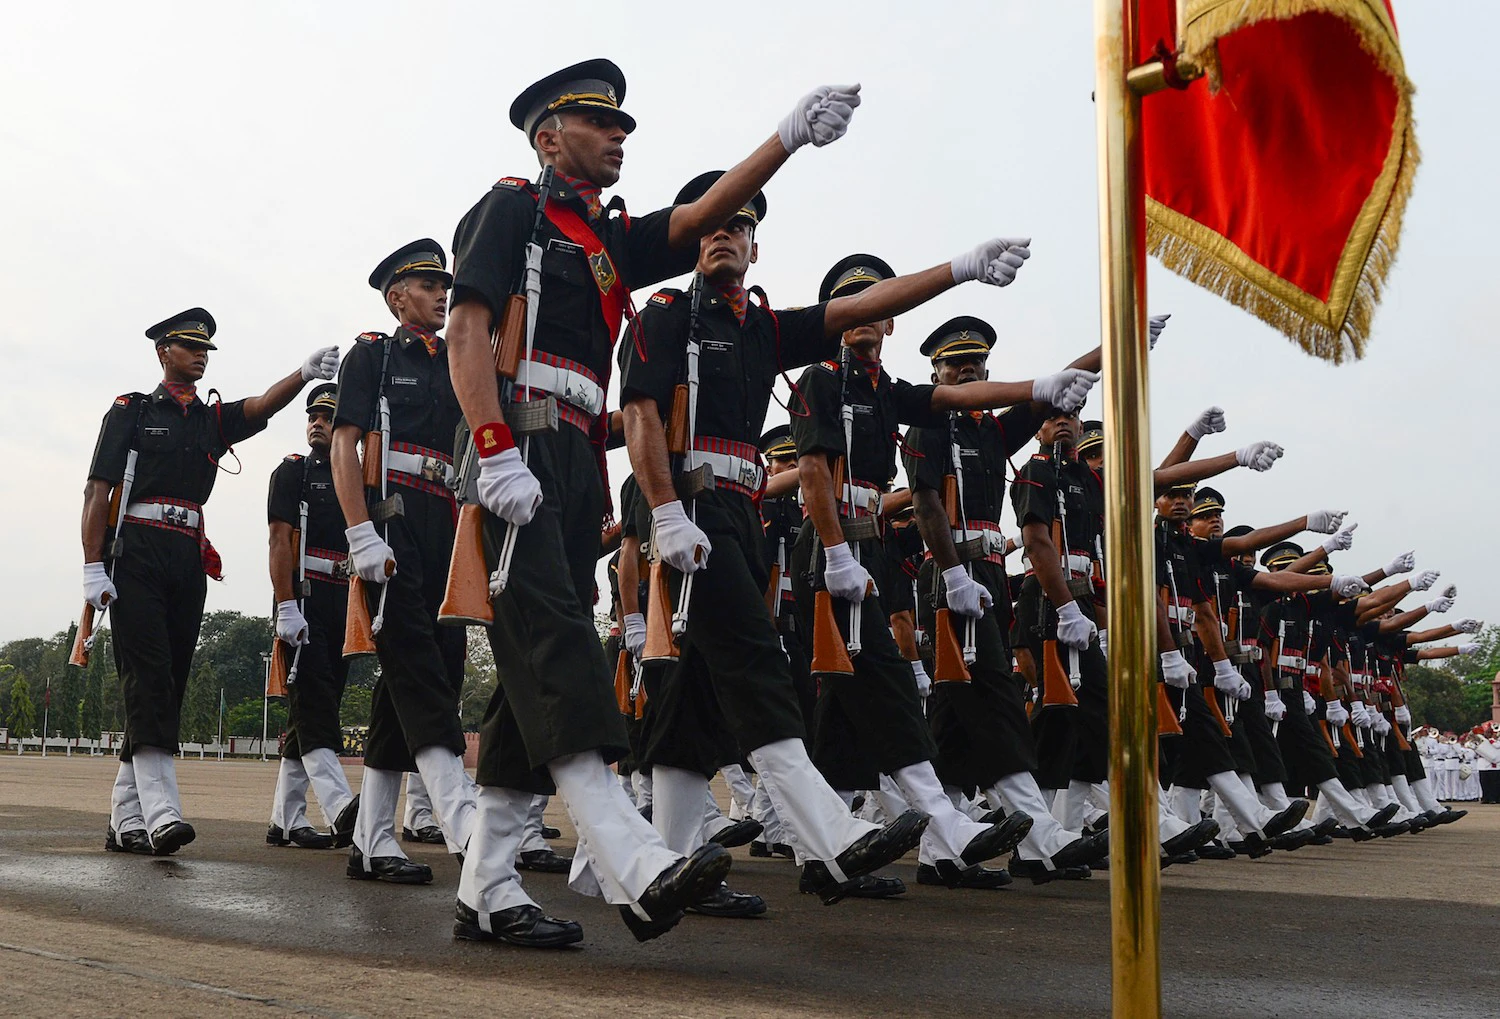 The Indian Army Doesn't Want Gay Officers to Go 'Unnoticed and Unpunished'